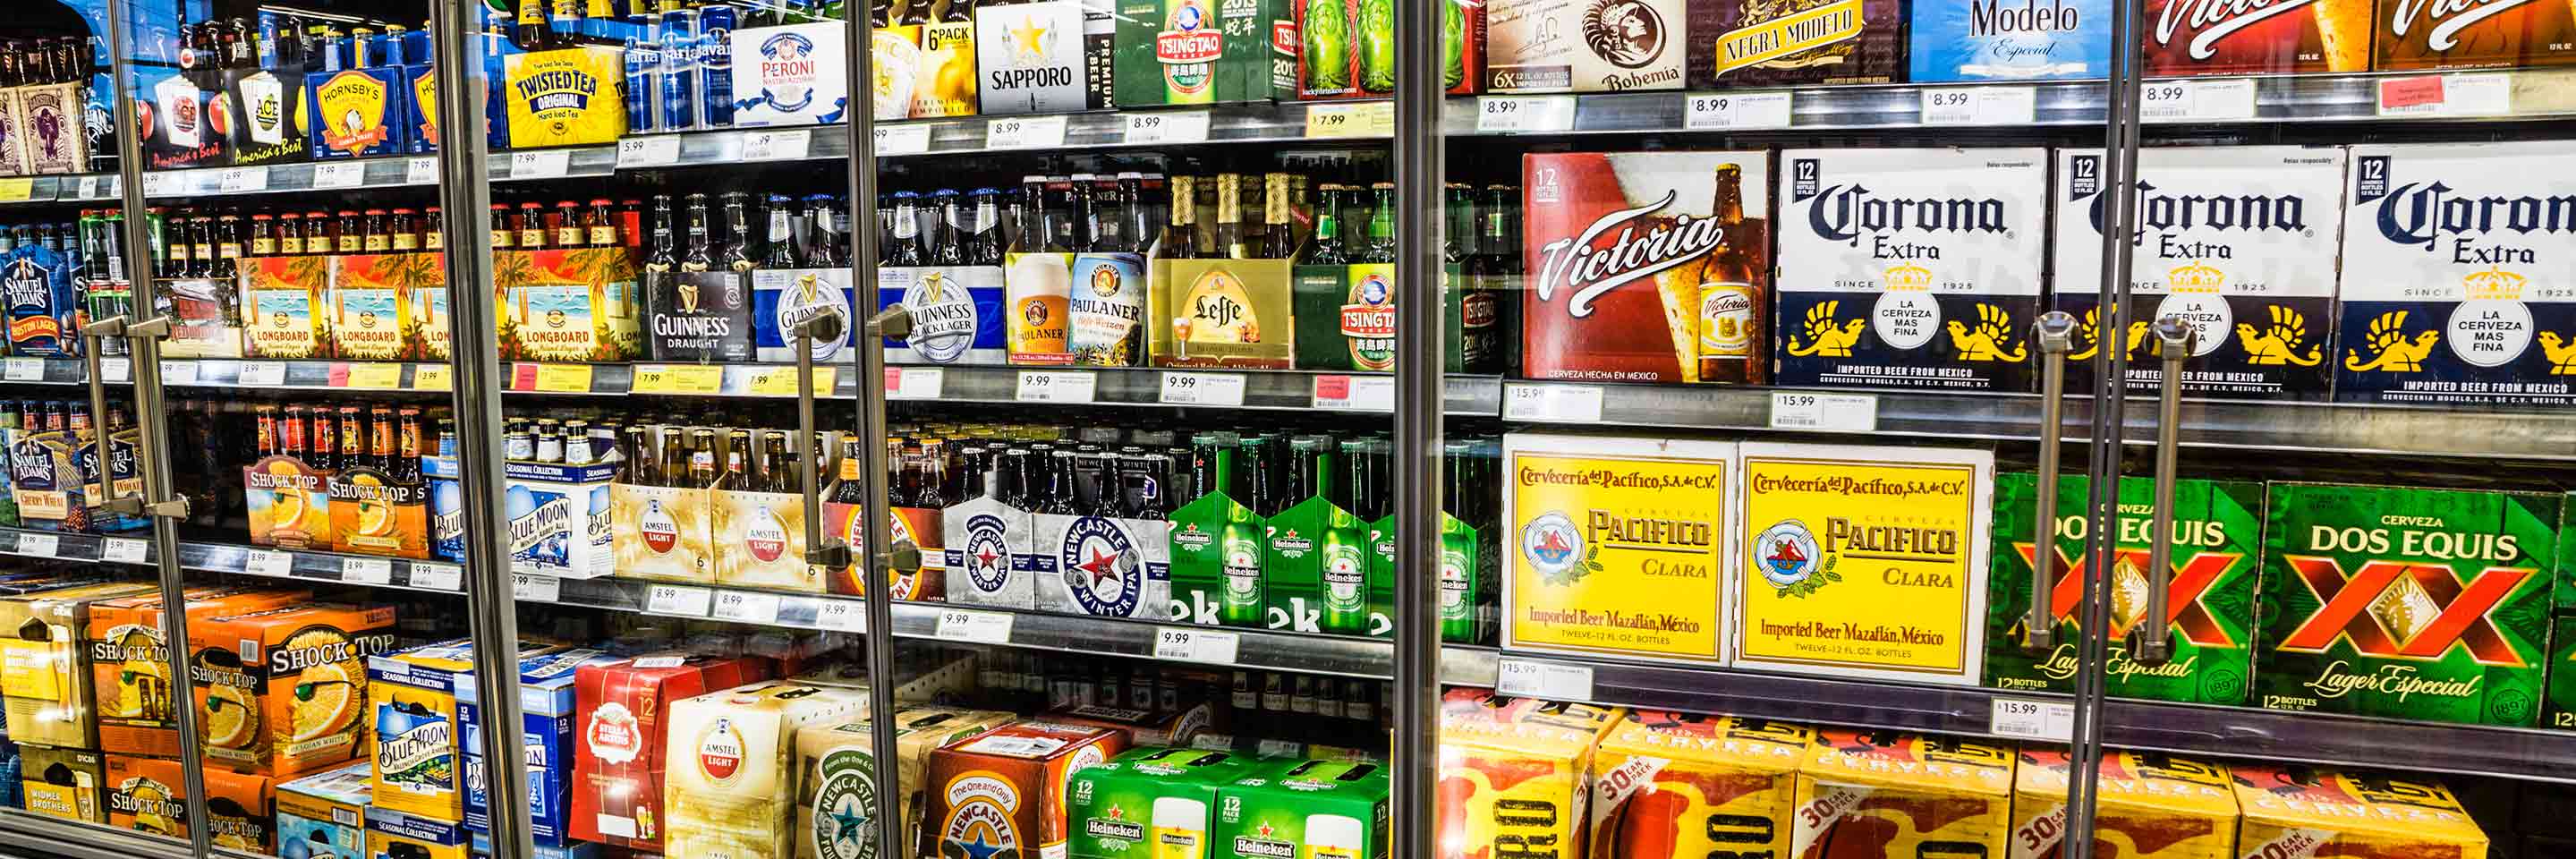 Stacks of beer and wine on shelves